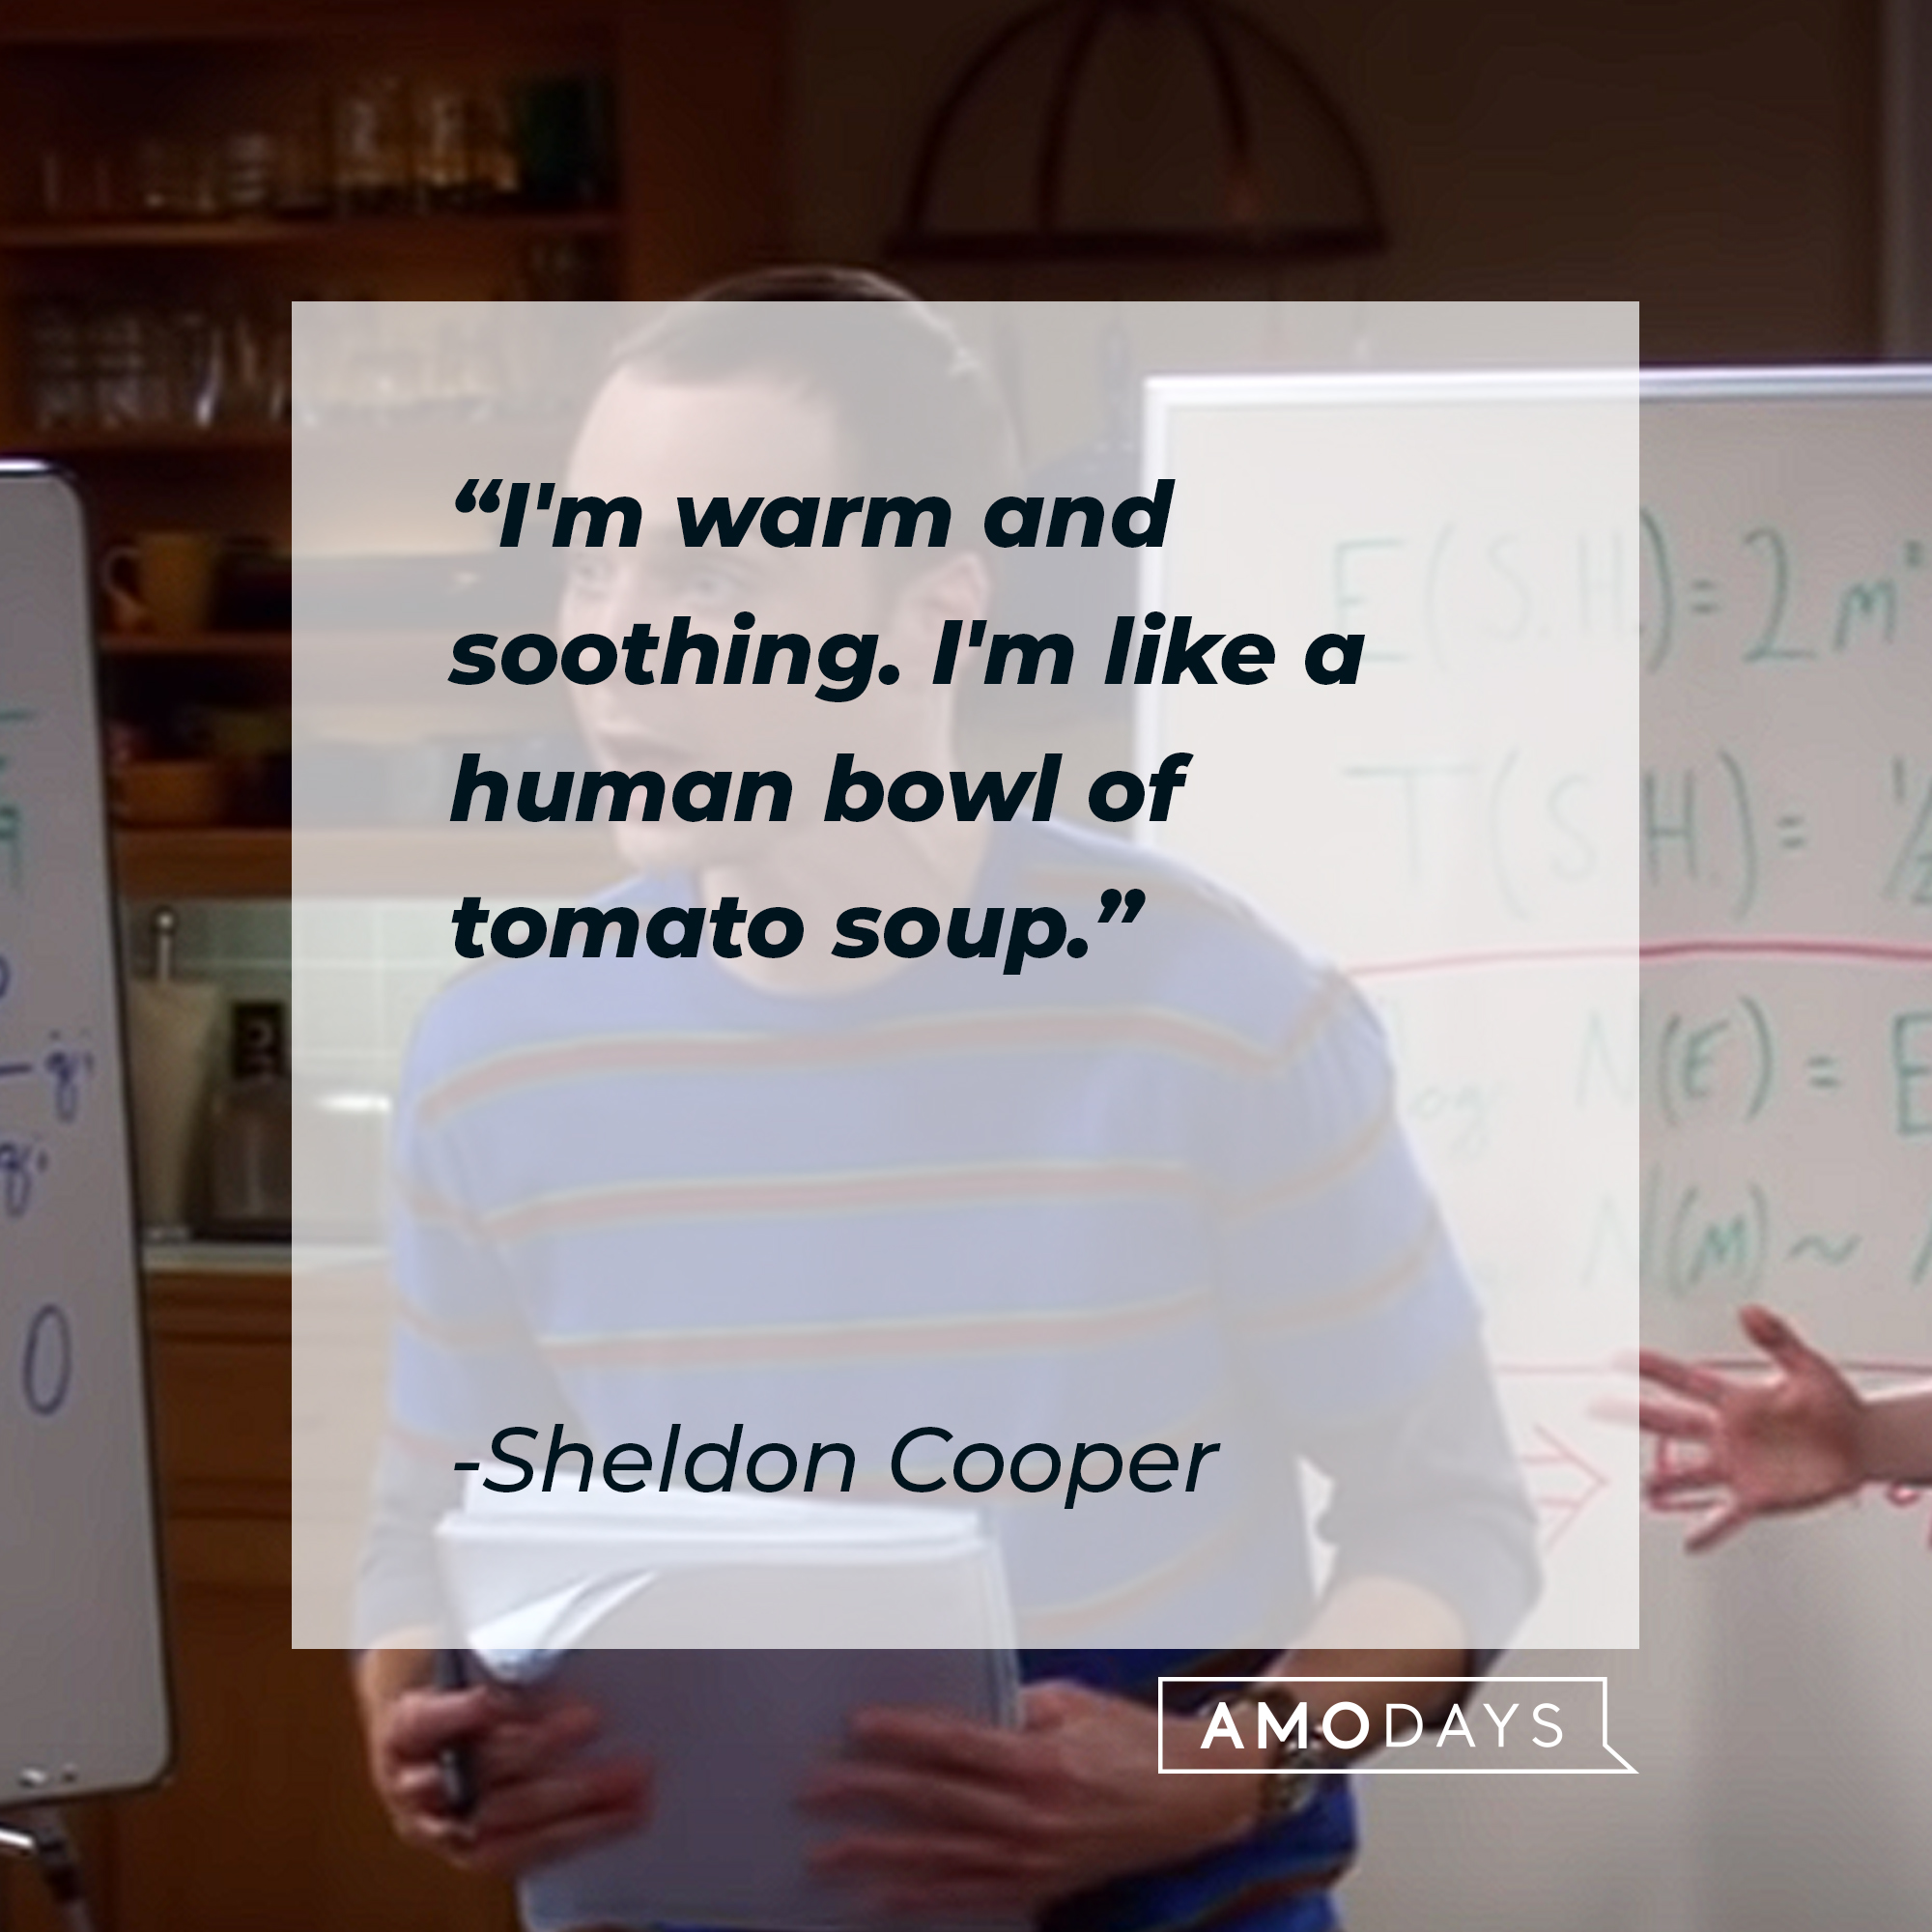 Sheldon Cooper's quote: "I'm warm and soothing. I'm like a human bowl of tomato soup." | Source: youtube.com/warnerbrostv